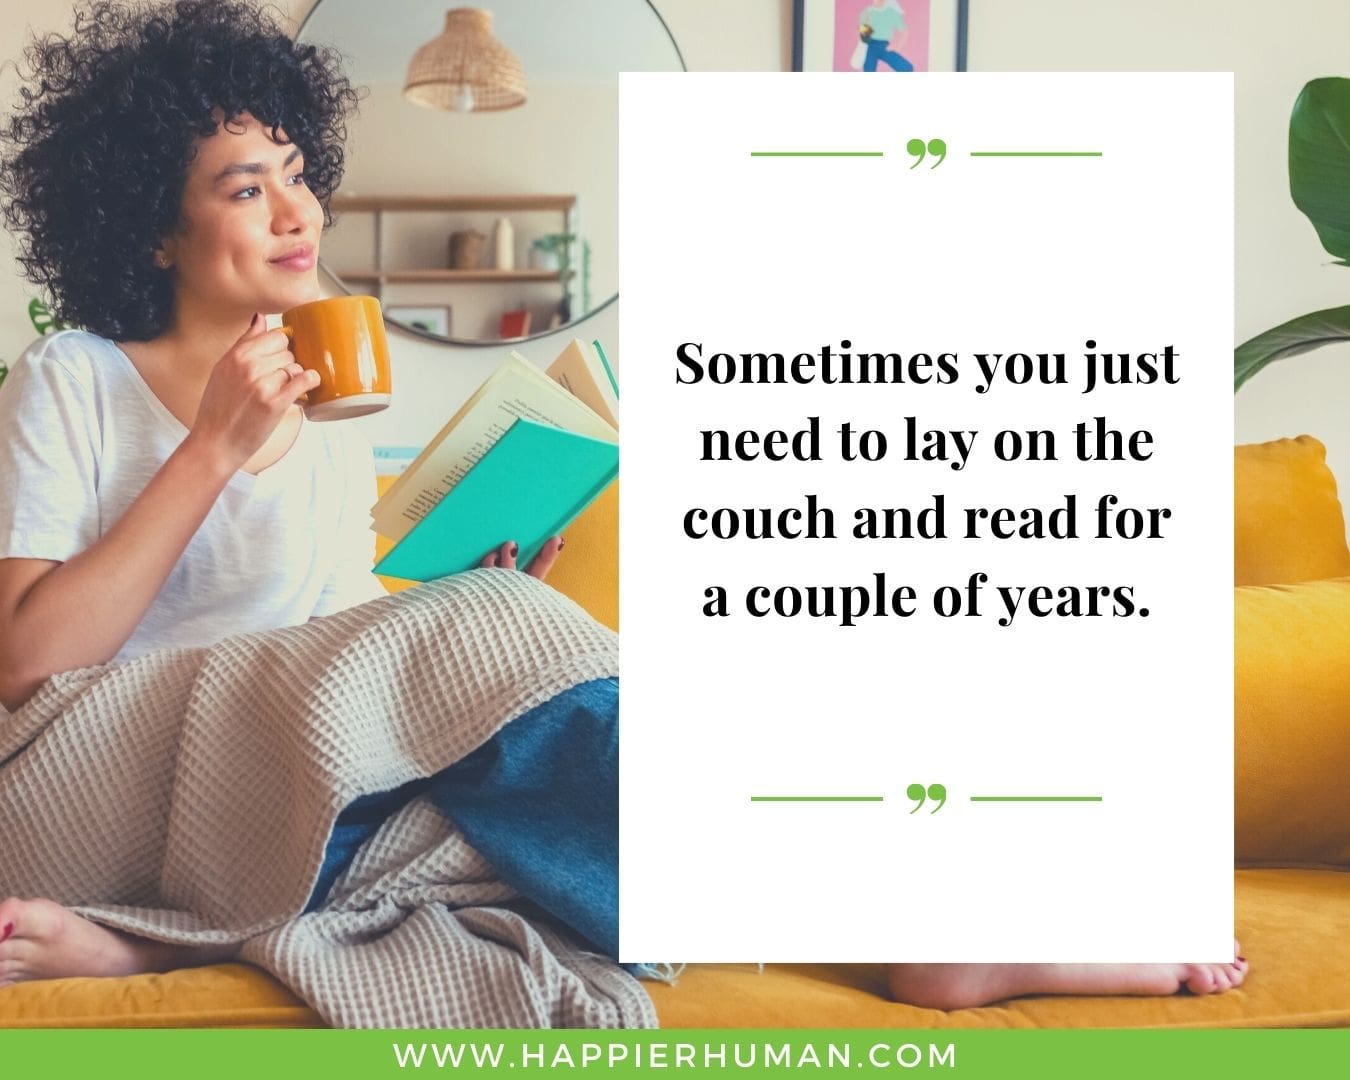 Introvert Quotes - “Sometimes you just need to lay on the couch and read for a couple of years.”